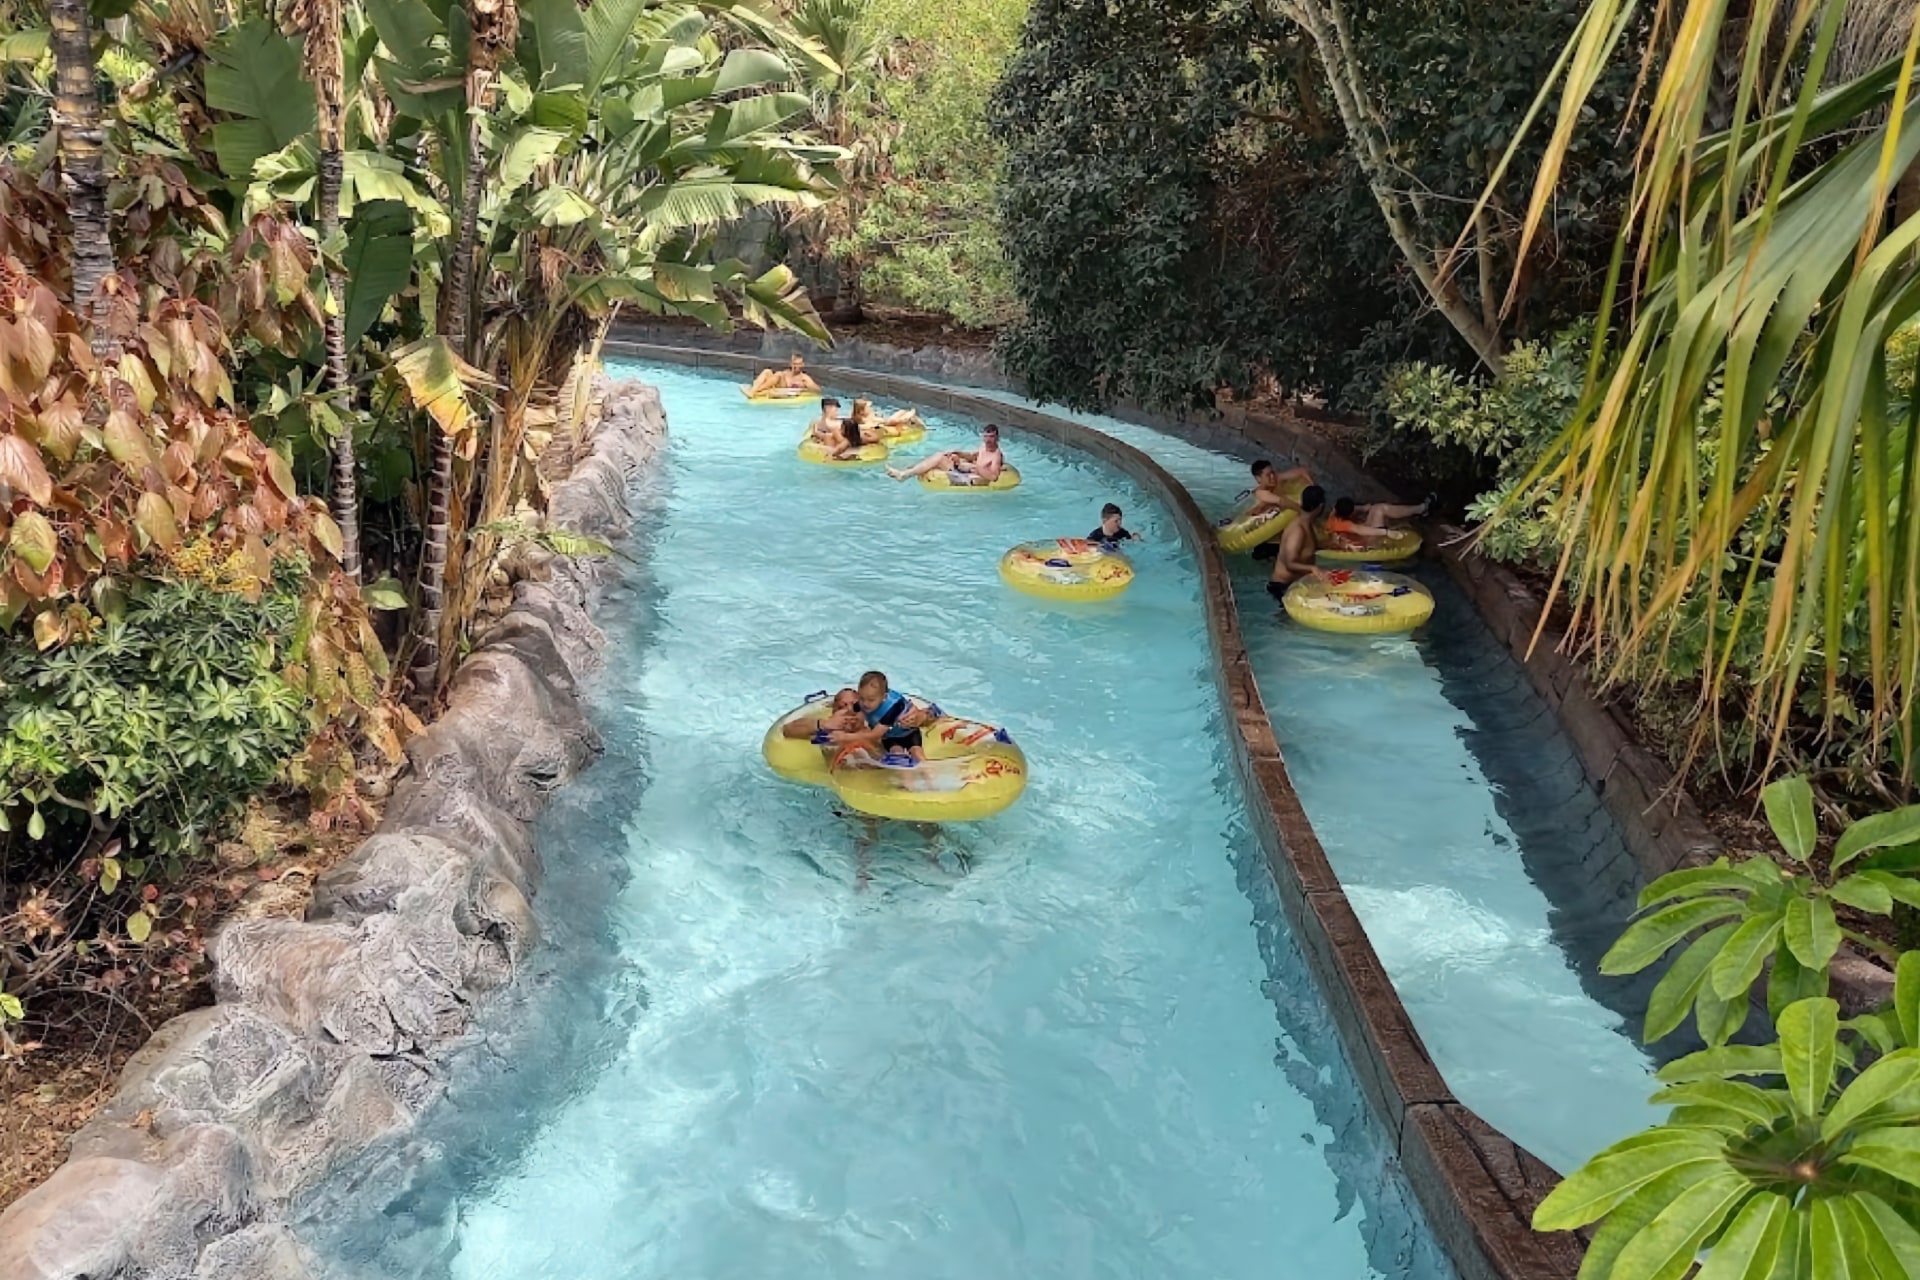 Scenic view of the lazy river winding through the tropical landscape at Siam Park, Tenerife